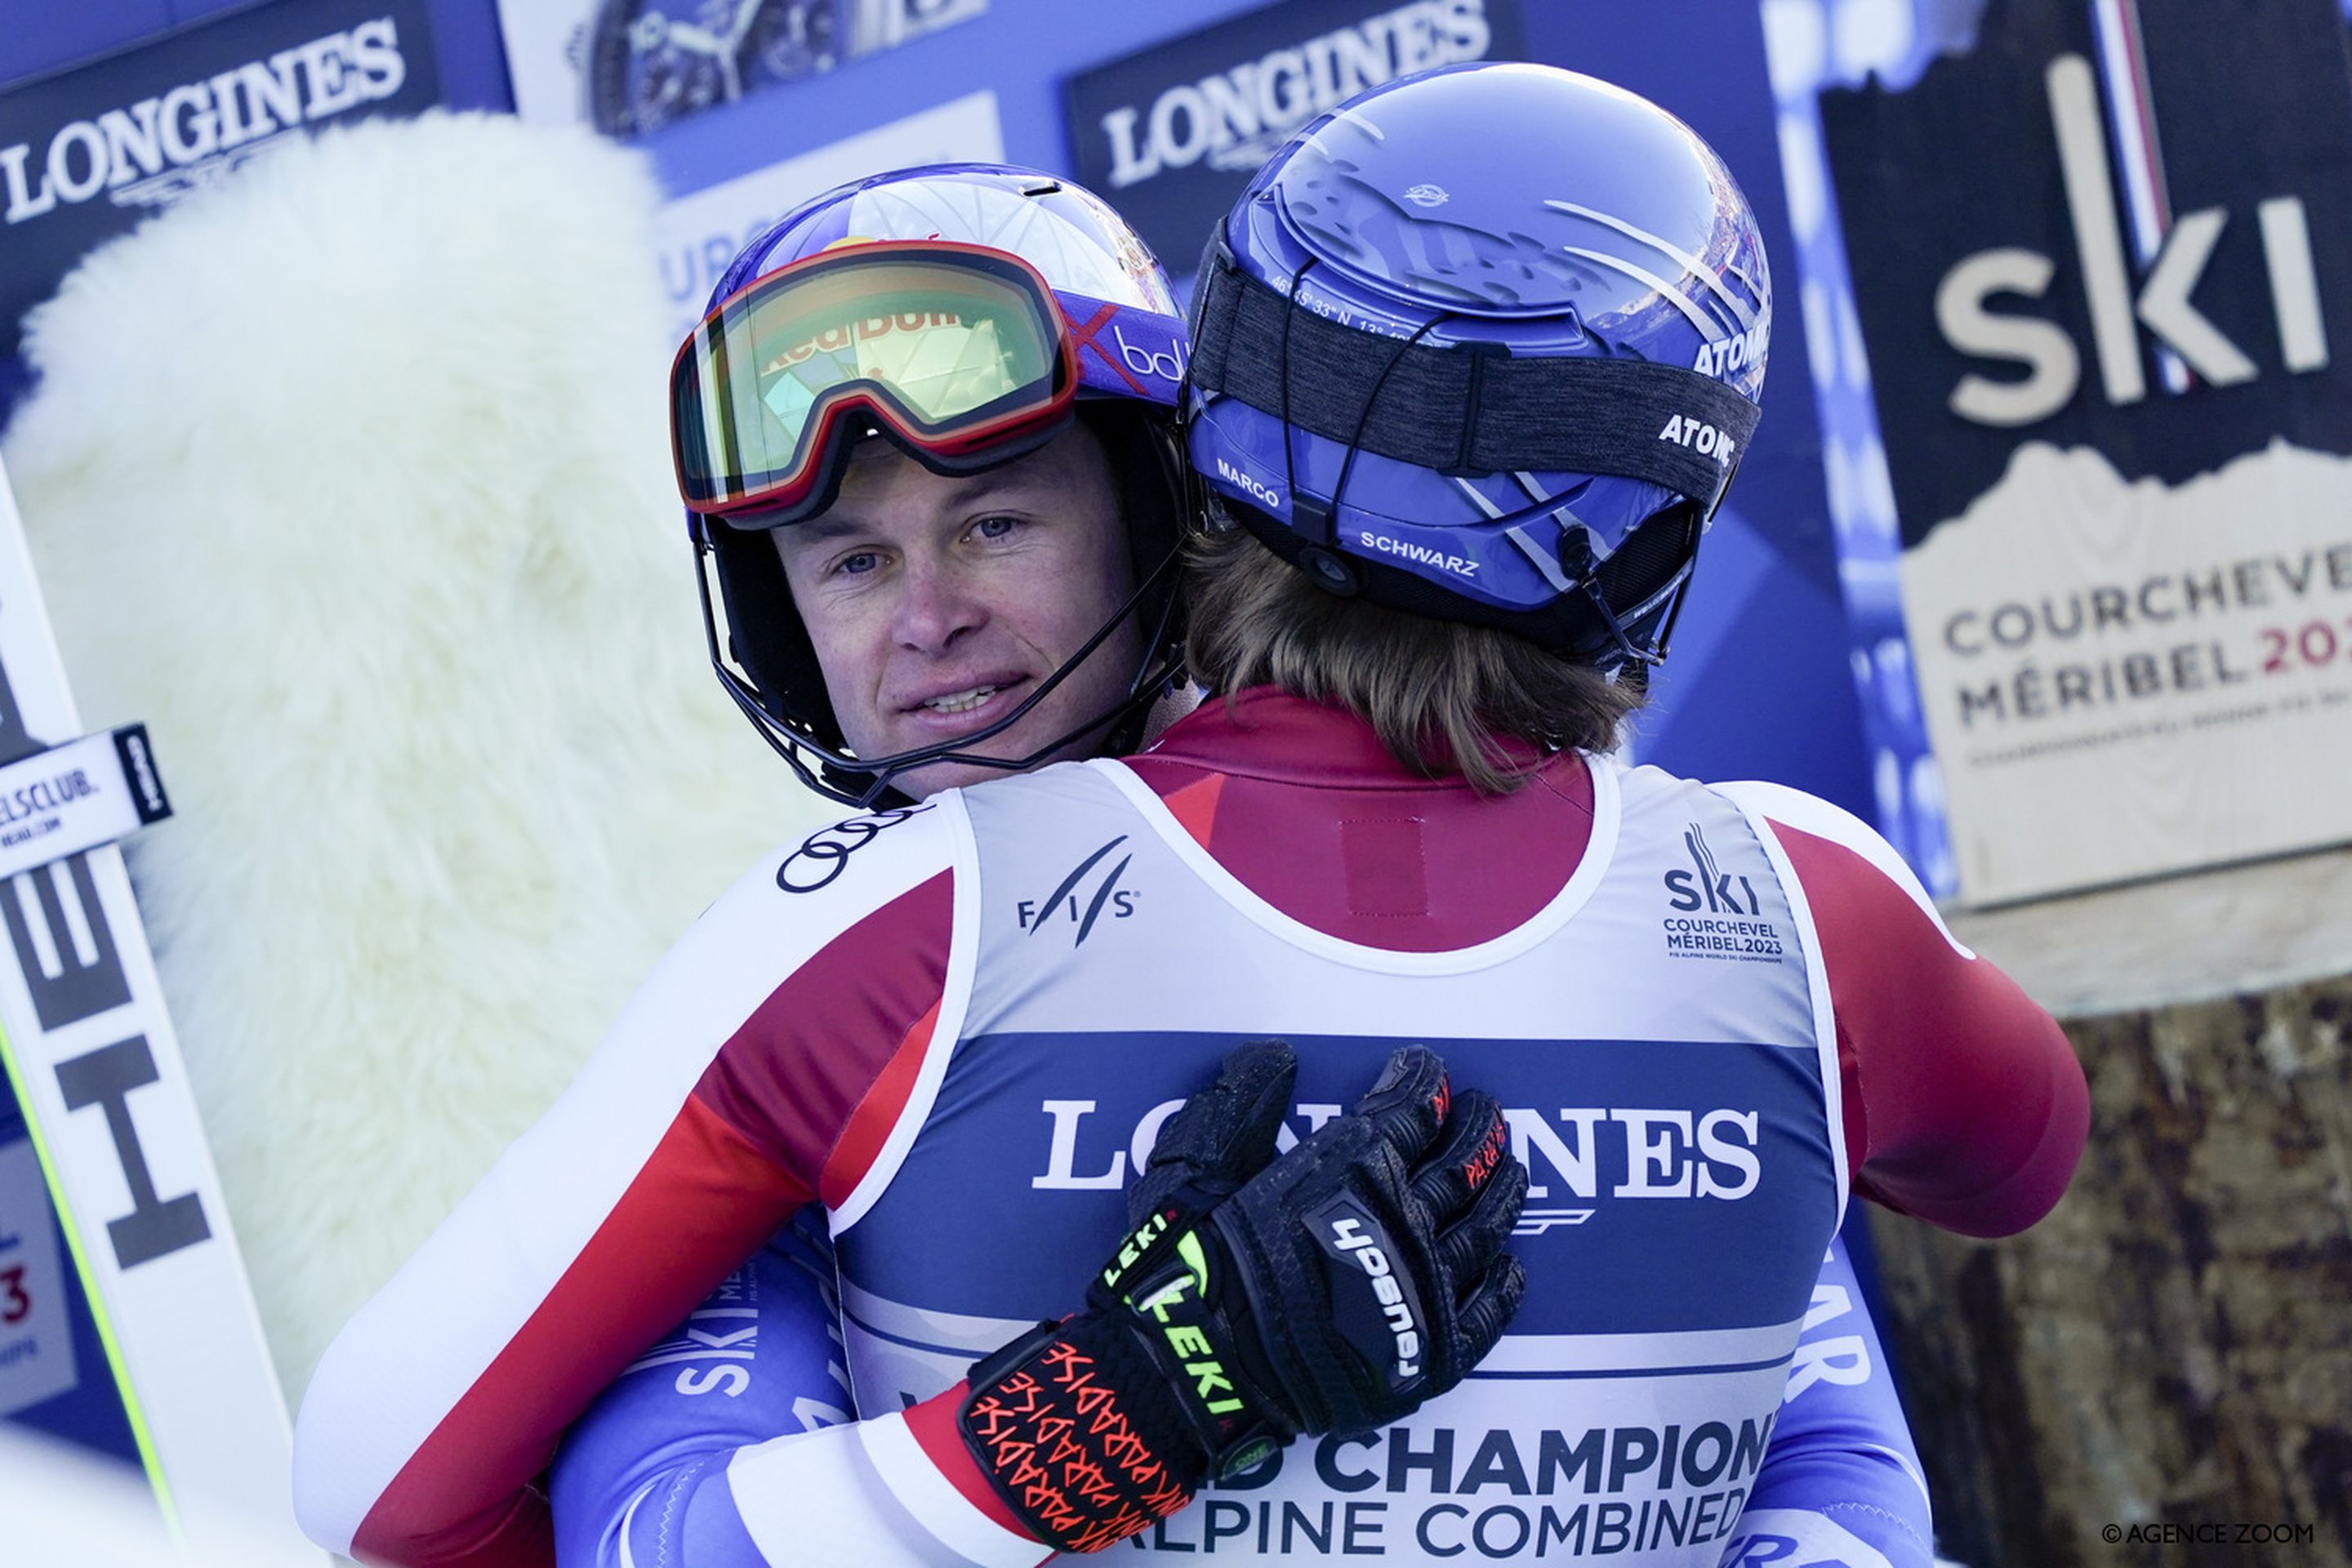 Pinturault and Schwarz embrace after flipping their 1-2 finish from the 2021 world championships (Agence Zoom)